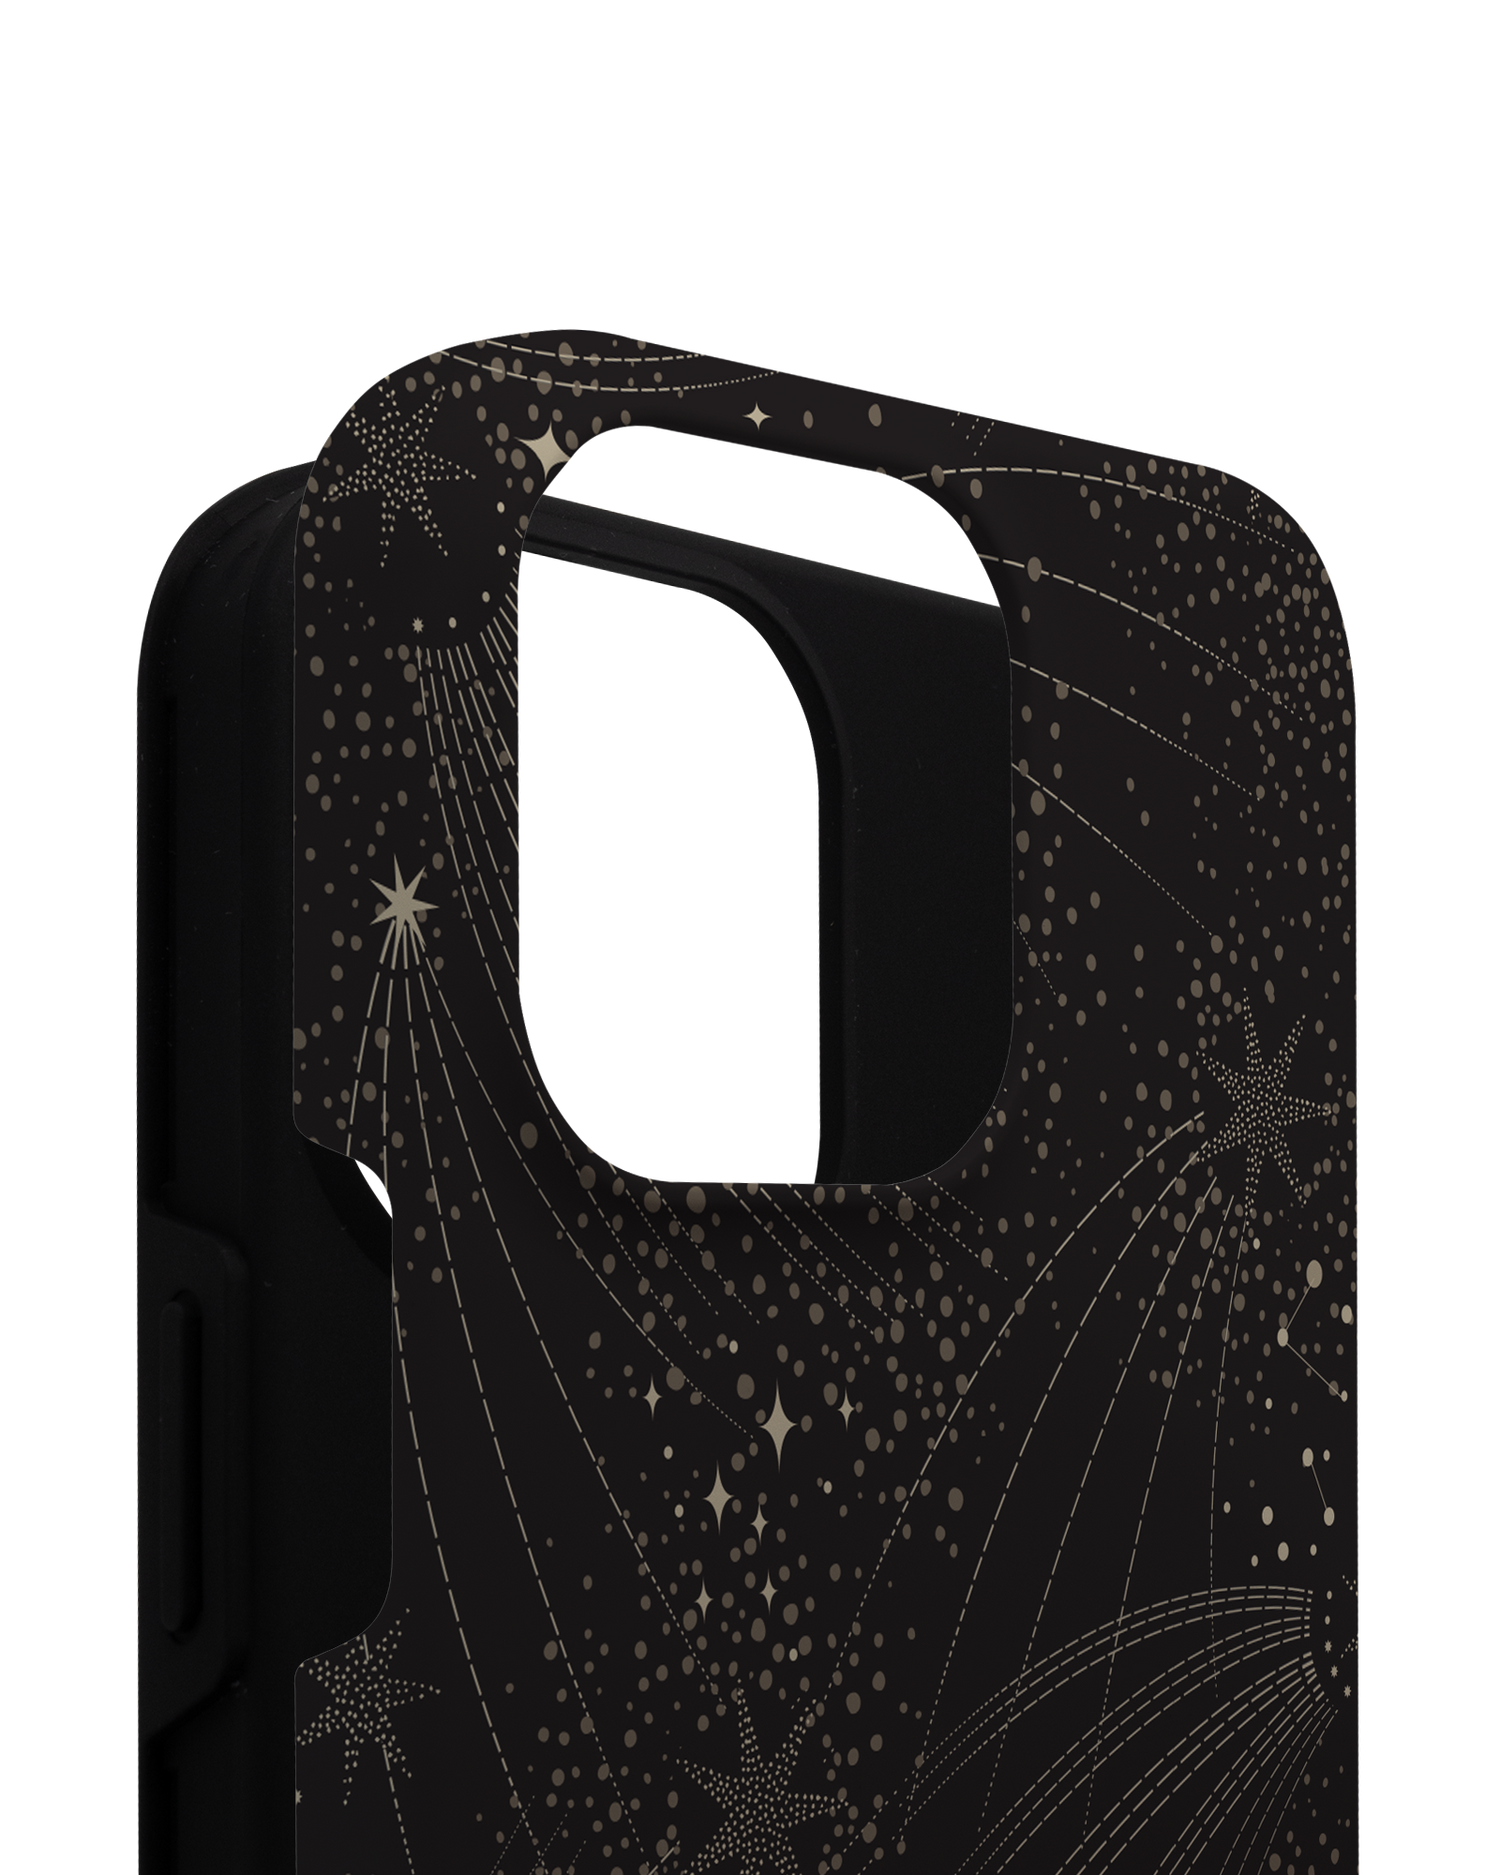 Make a Wish Star Premium Phone Case for Apple iPhone 14 Pro Max consisting of 2 parts